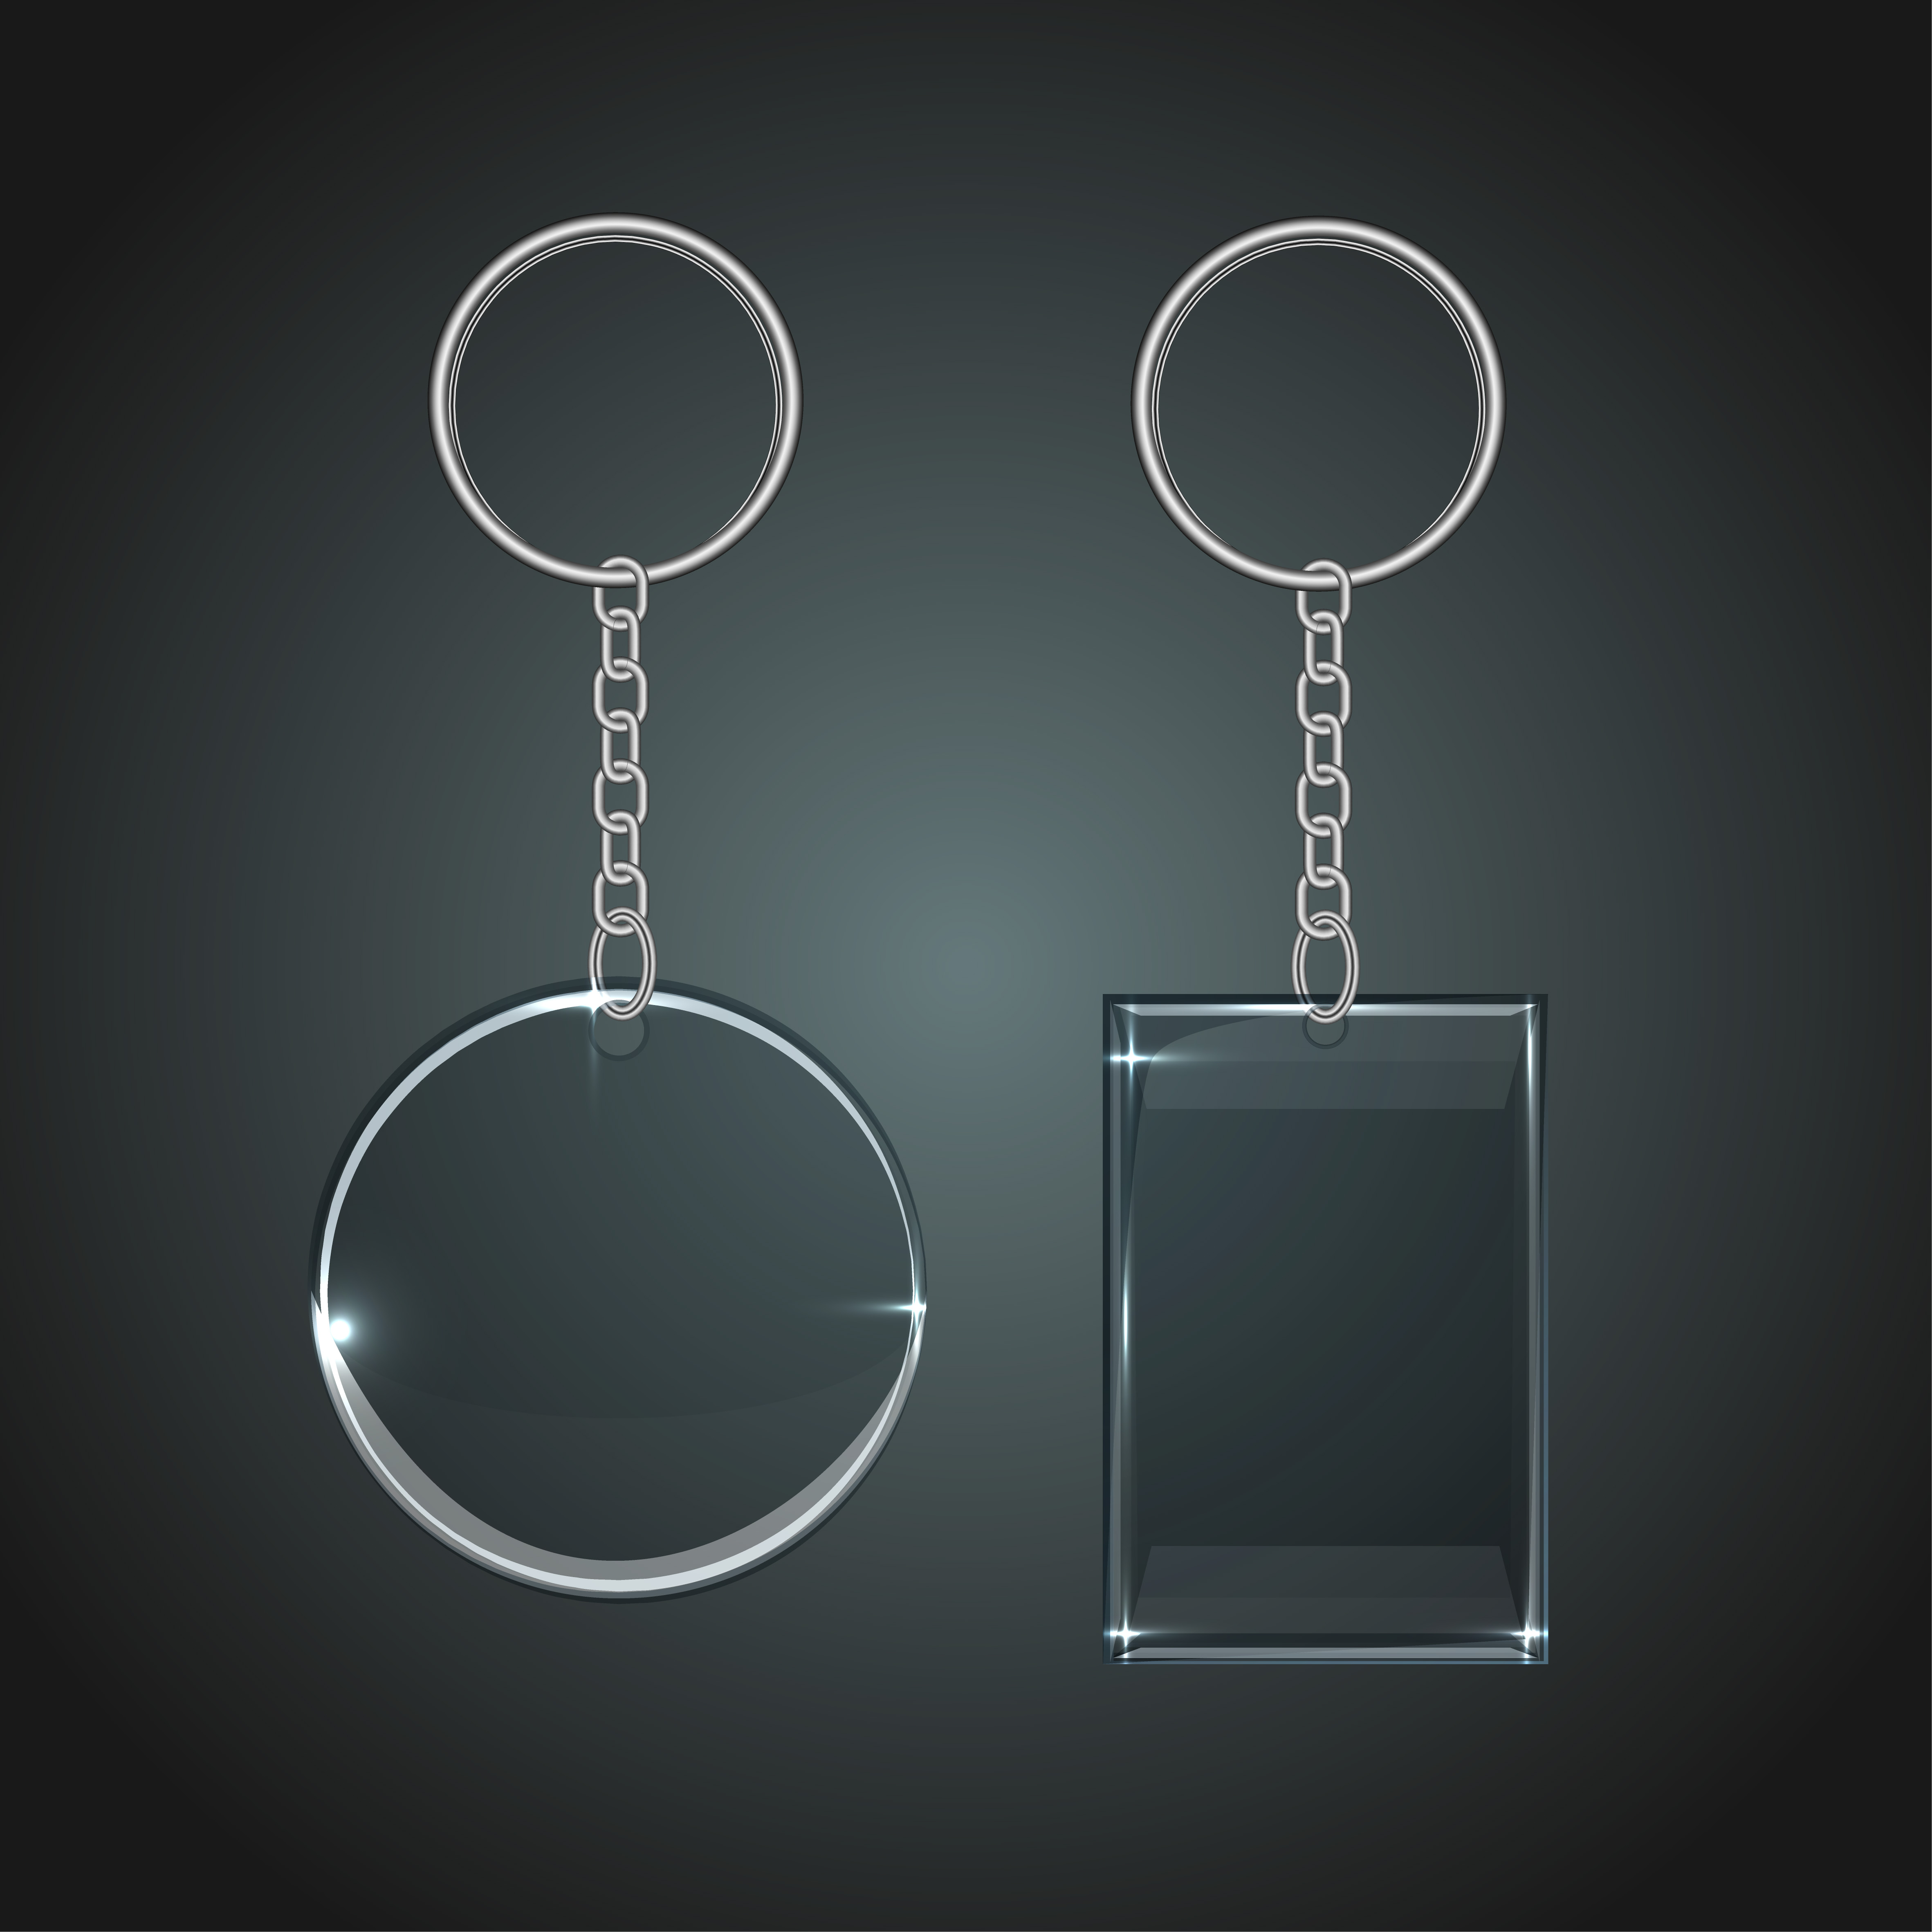 Shining keychain template vectors 05 free download